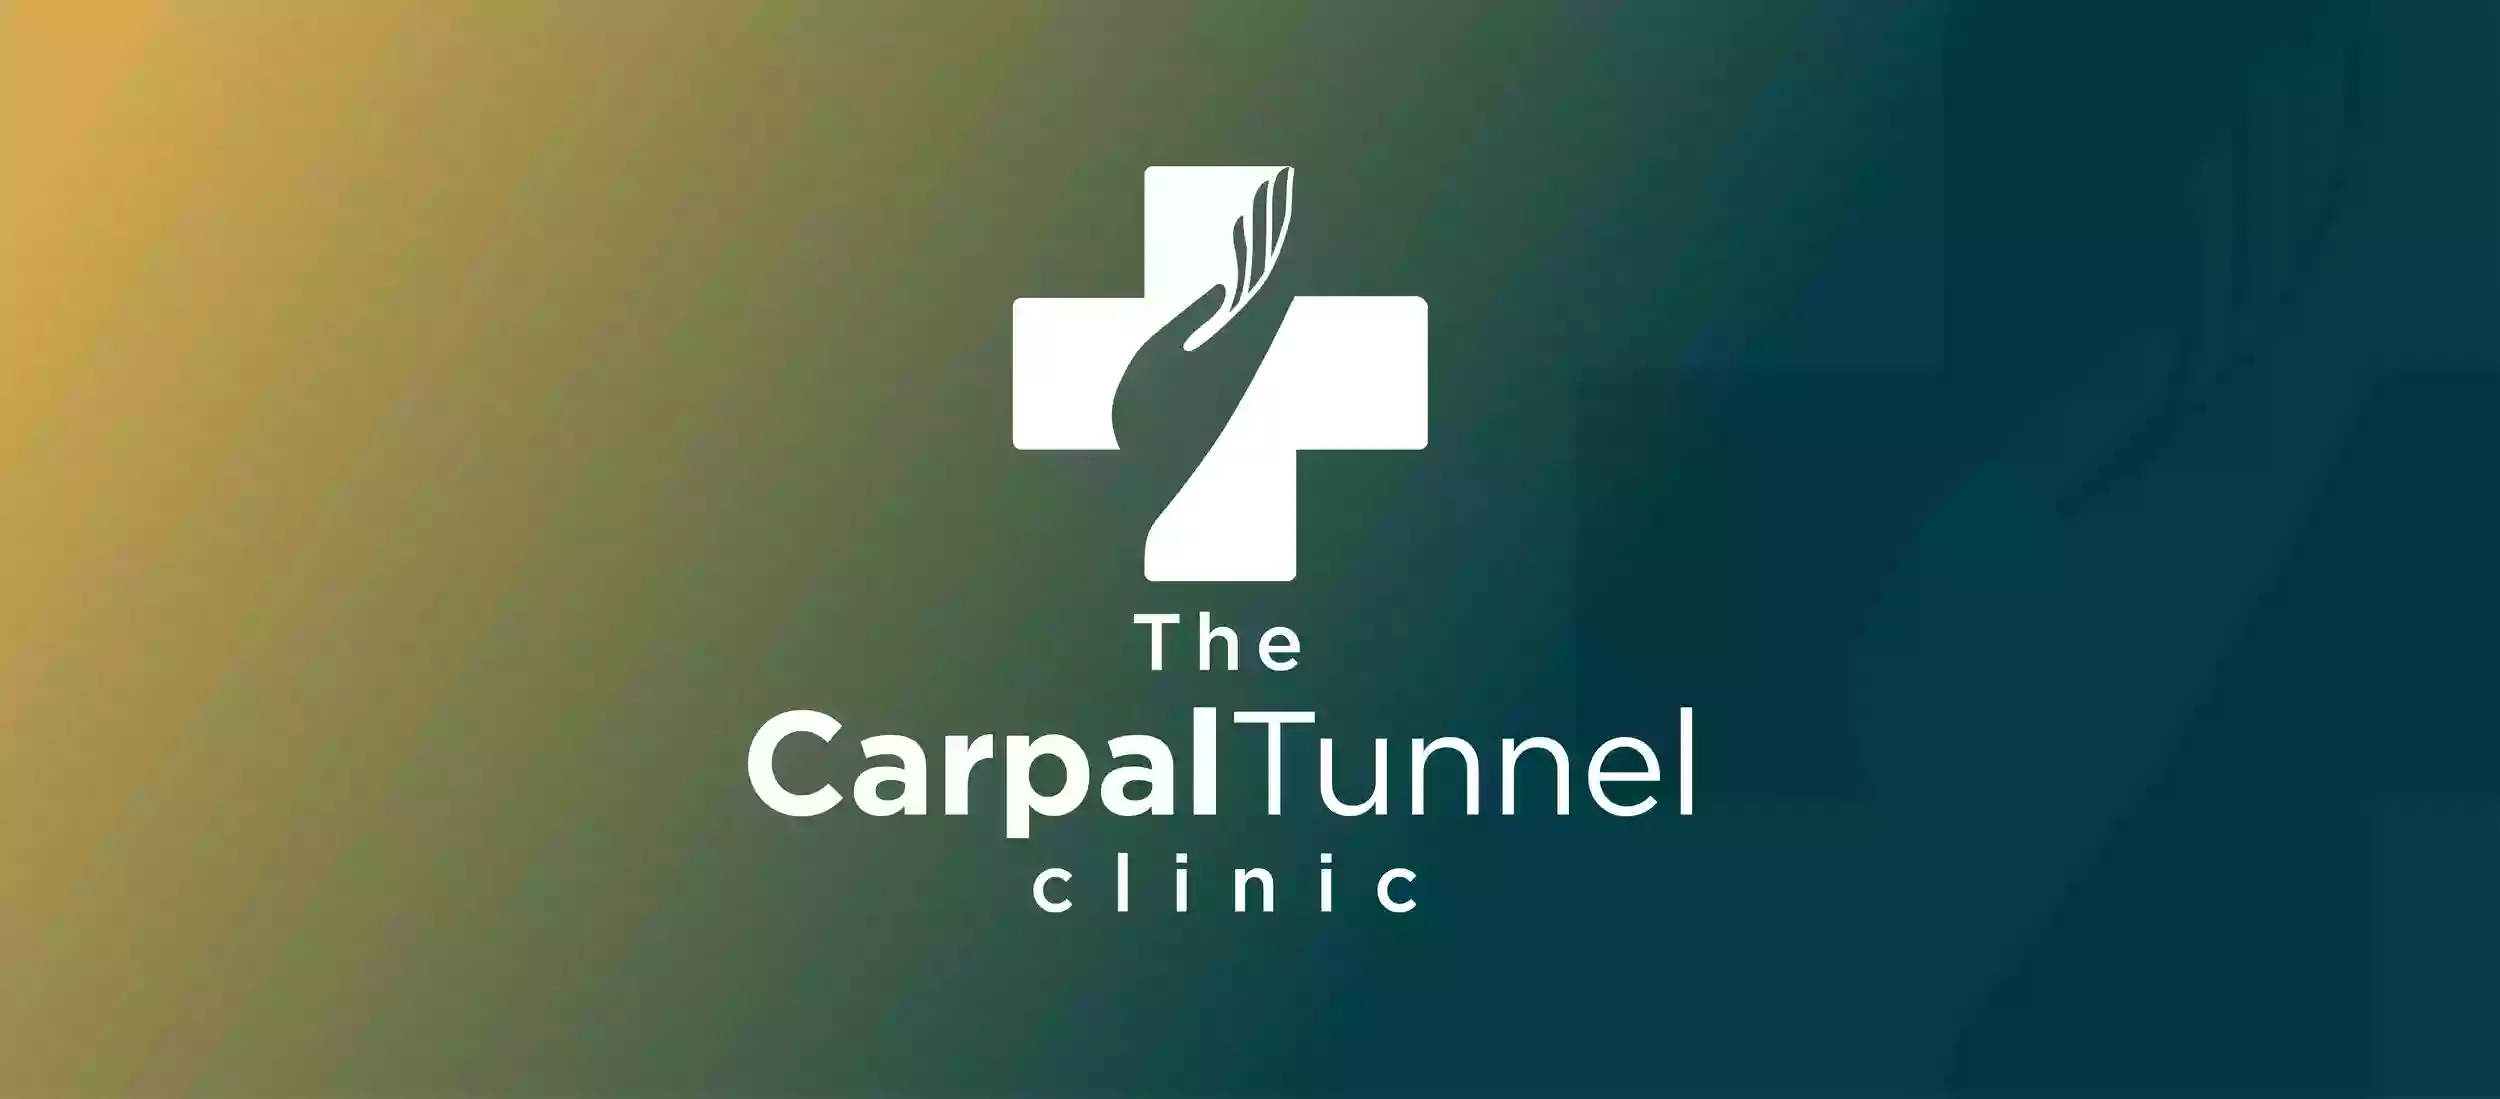 The Carpal Tunnel Clinic